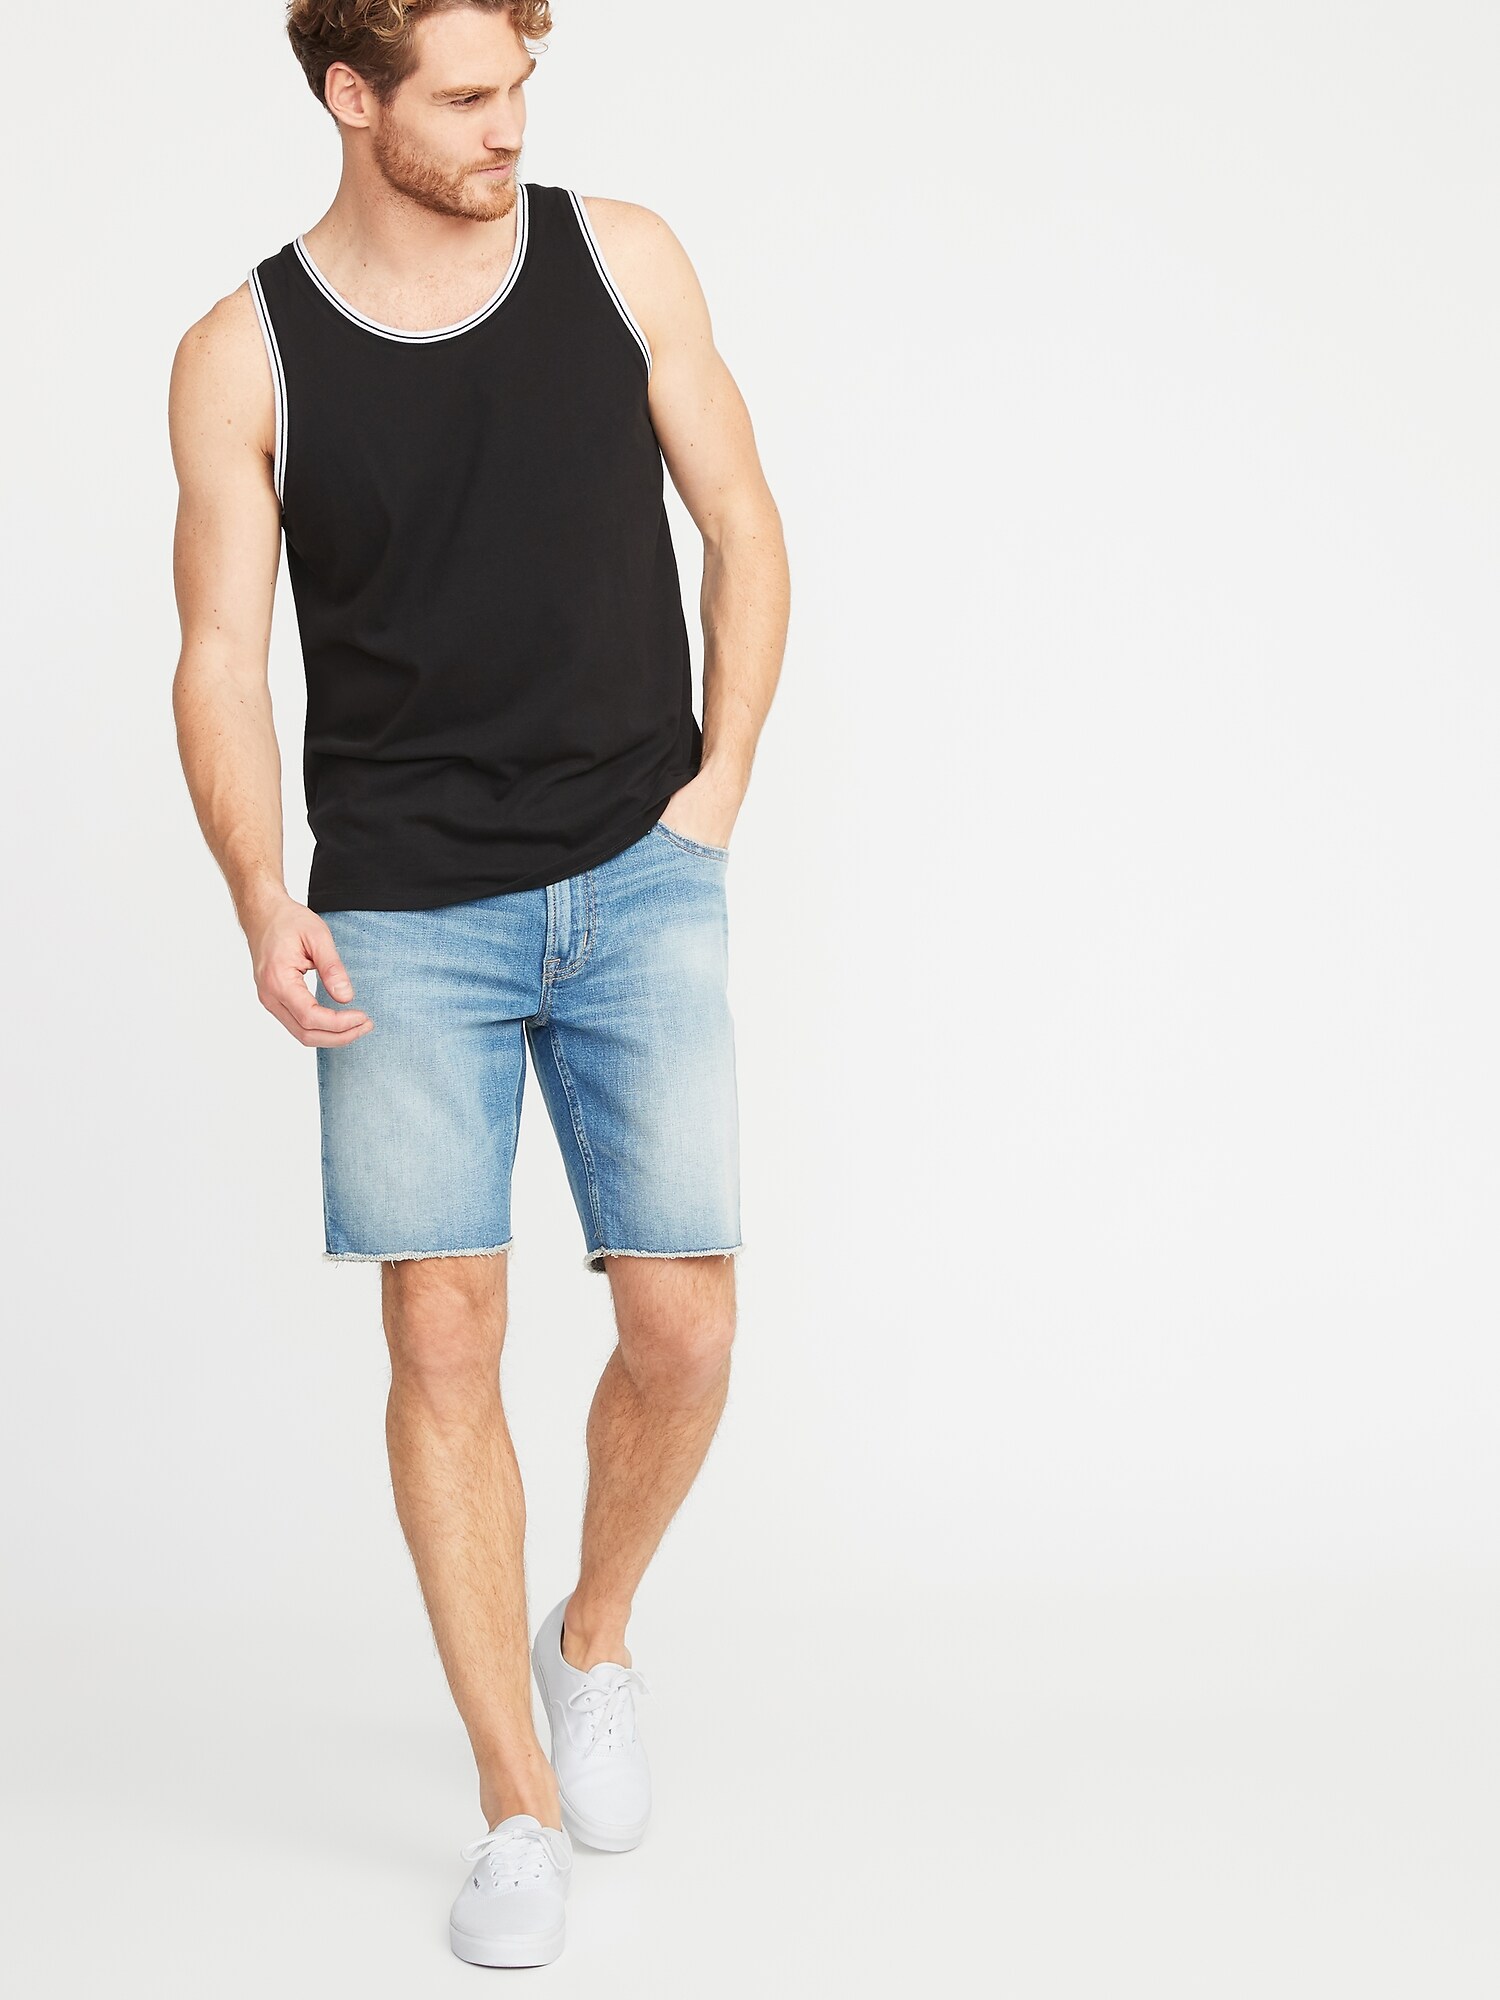 Soft-Washed Tipped Jersey Tank for Men | Old Navy